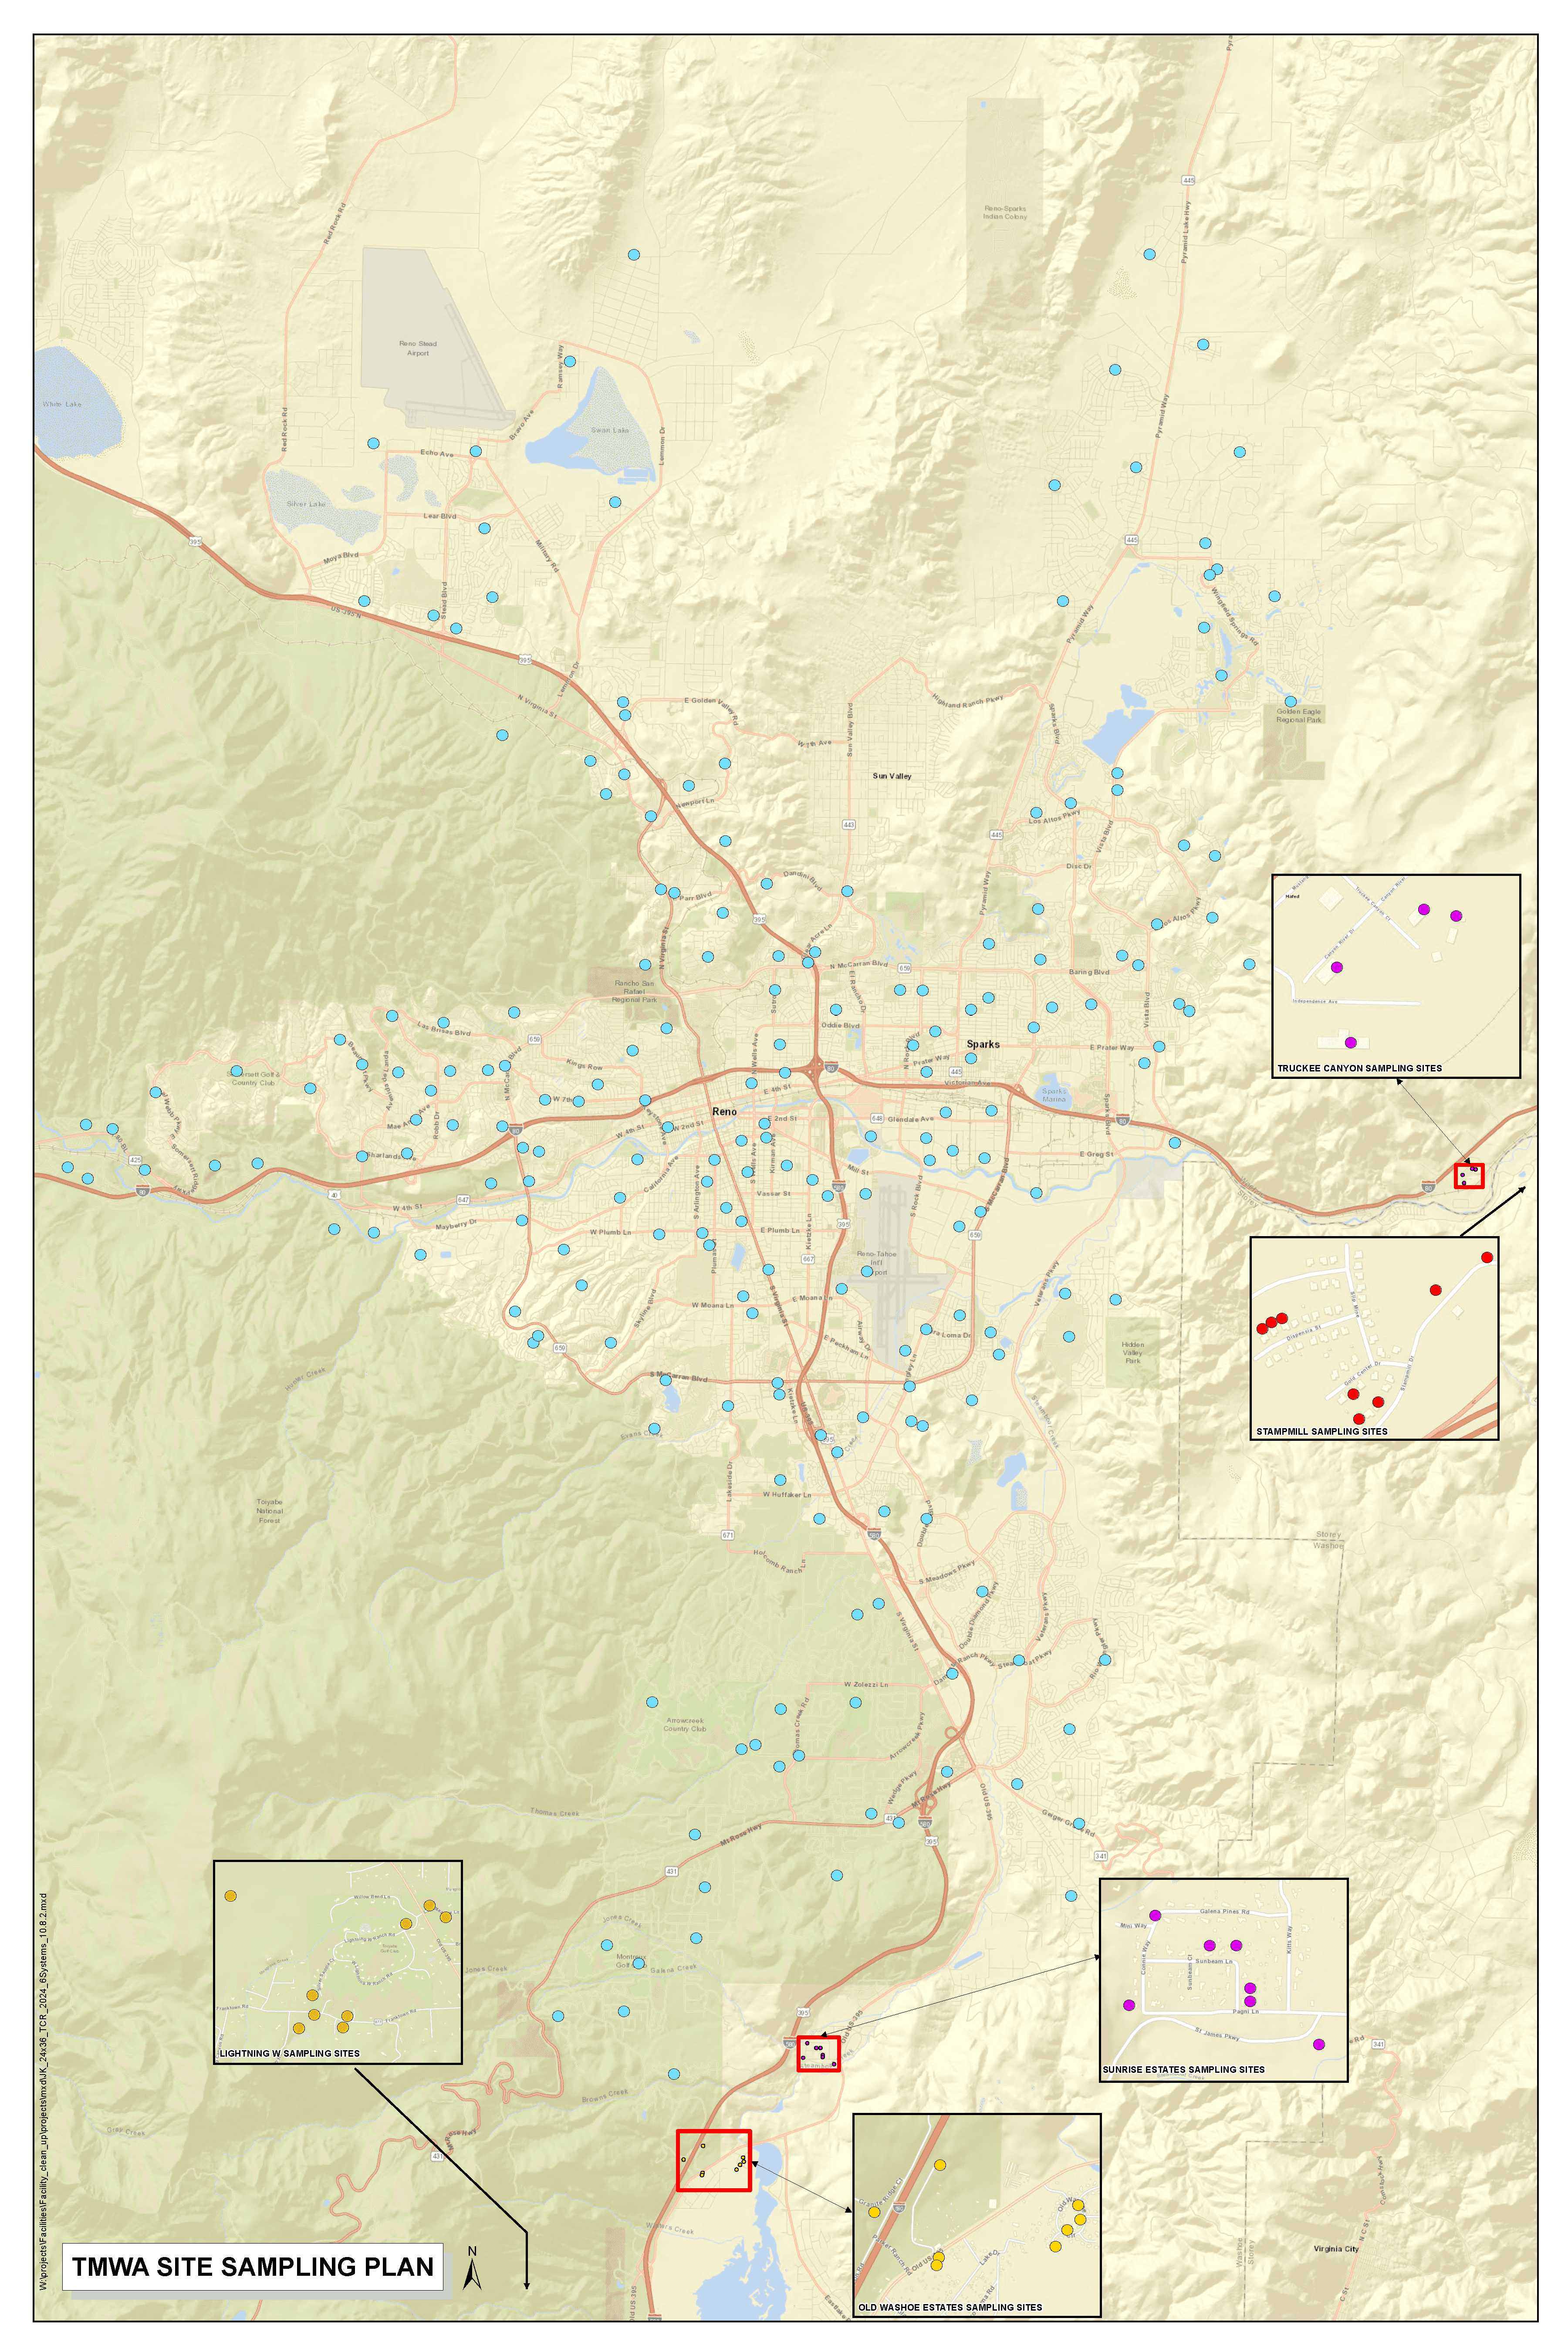 Water Quality Sampling Map for TMWA's Service Area